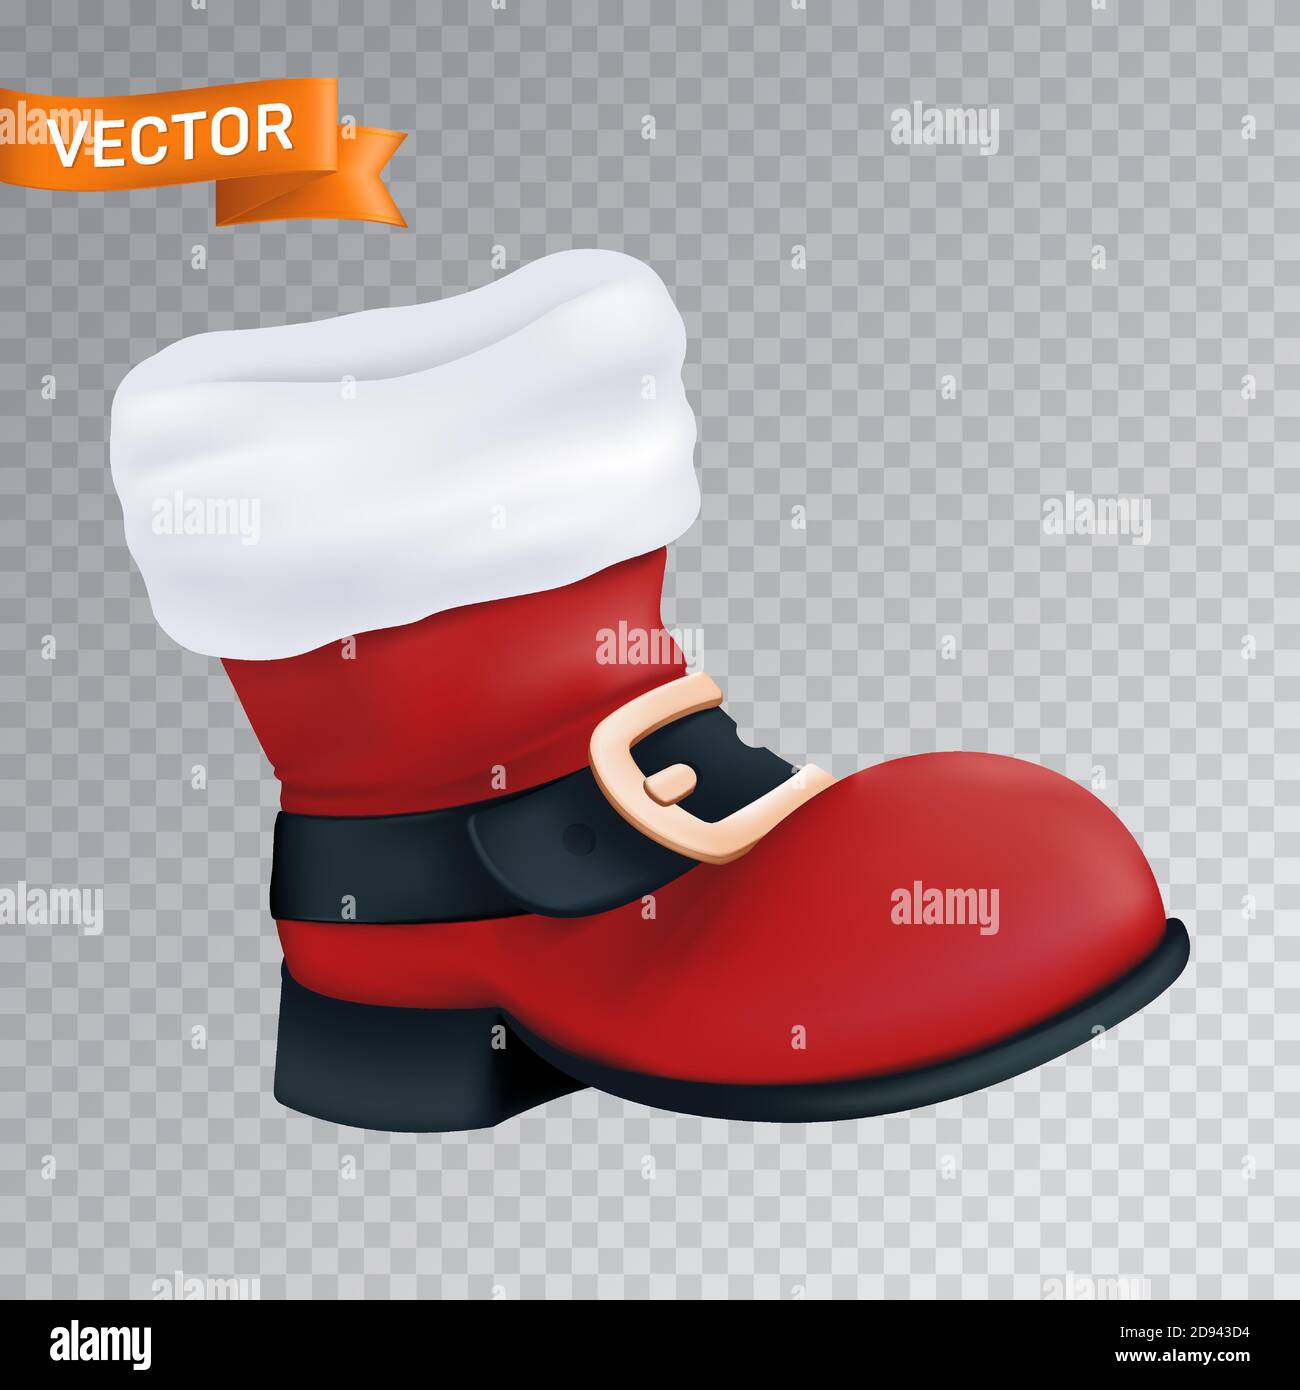 Red boot of Santa Claus with a white fur and a black belt with a golden buckle. Realistic vector illustration of an empty close up Christmas footwear Stock Vector